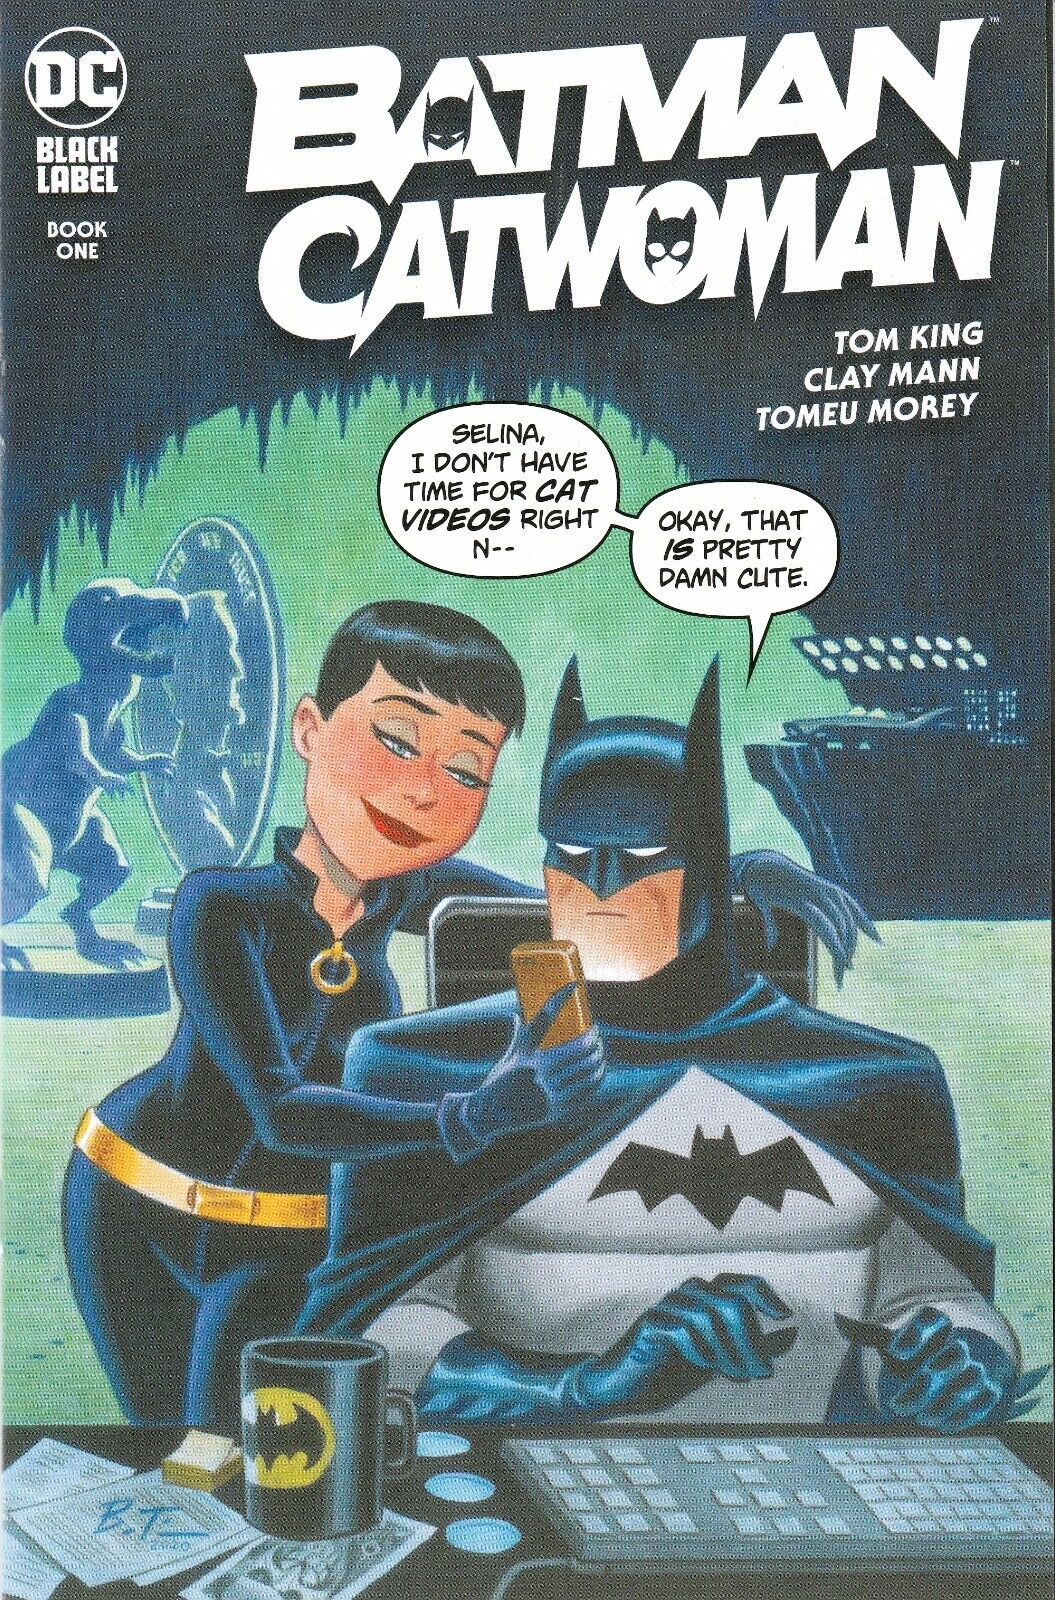 BATMAN CATWOMAN #1 (2021) BRUCE TIMM EXCLUSIVE LIMITED 'TEAM' VARIANT ~UNREAD NM